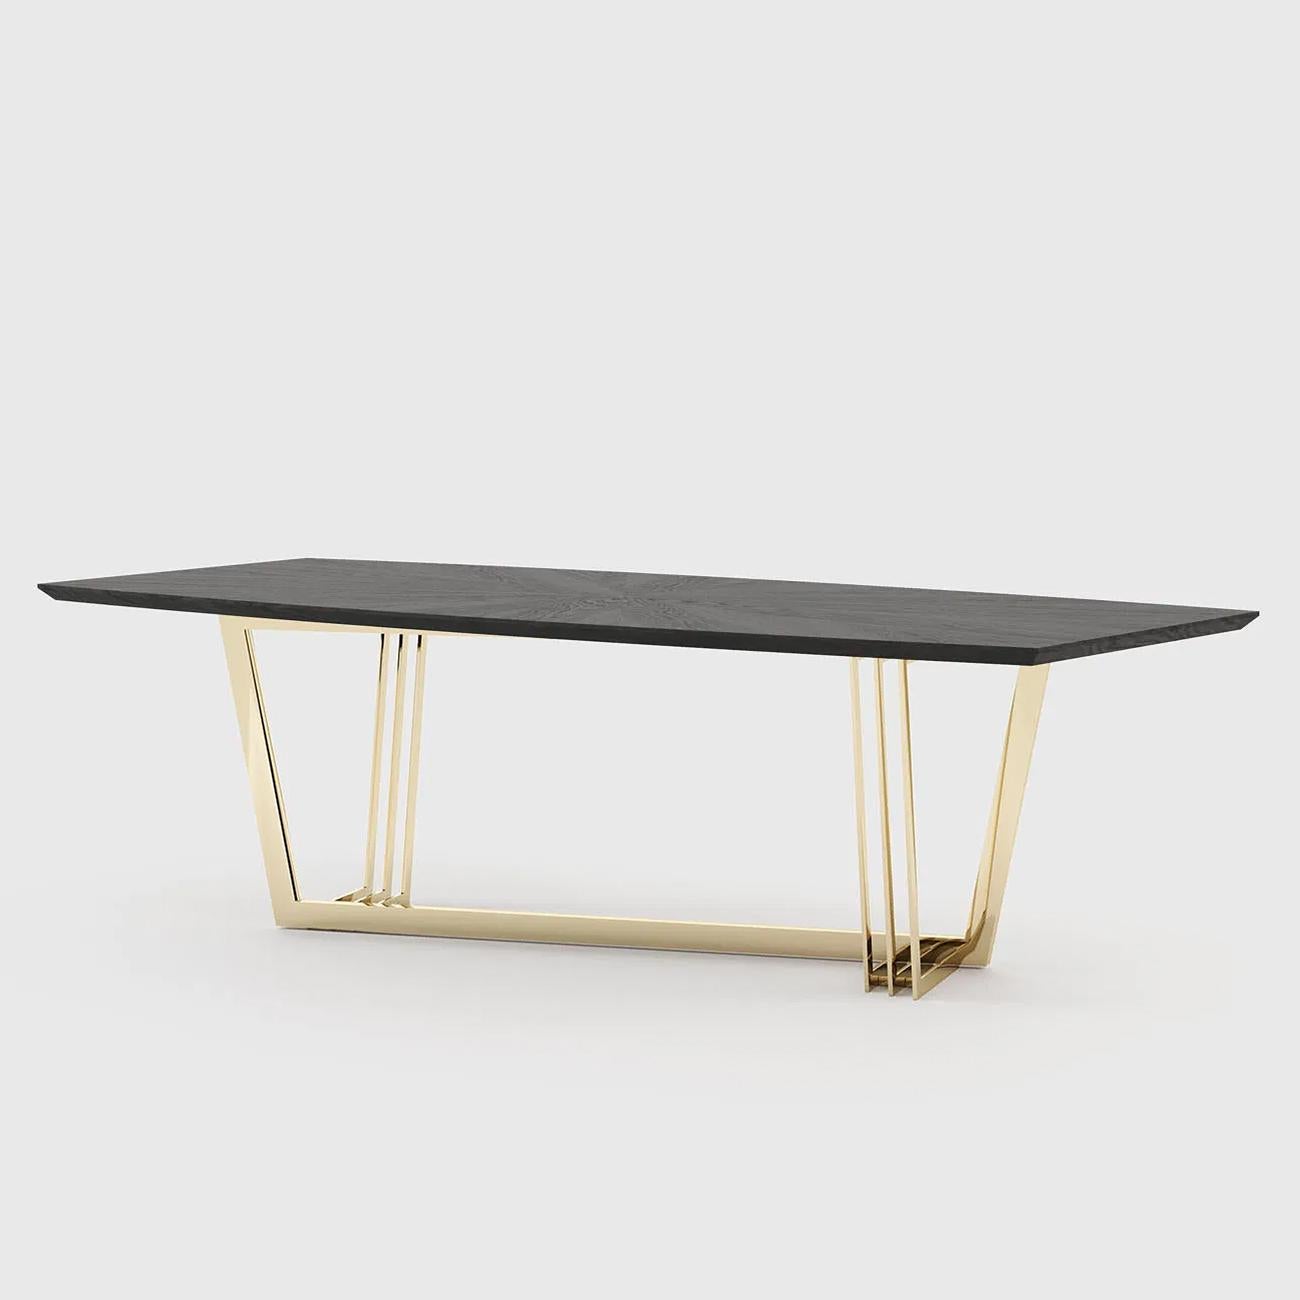 Dining Table Kardina with polished stainless steel base
in gold finish and with solid ash top stained in black finish.
Also available with other steel finishes and other wood finishes
on request.